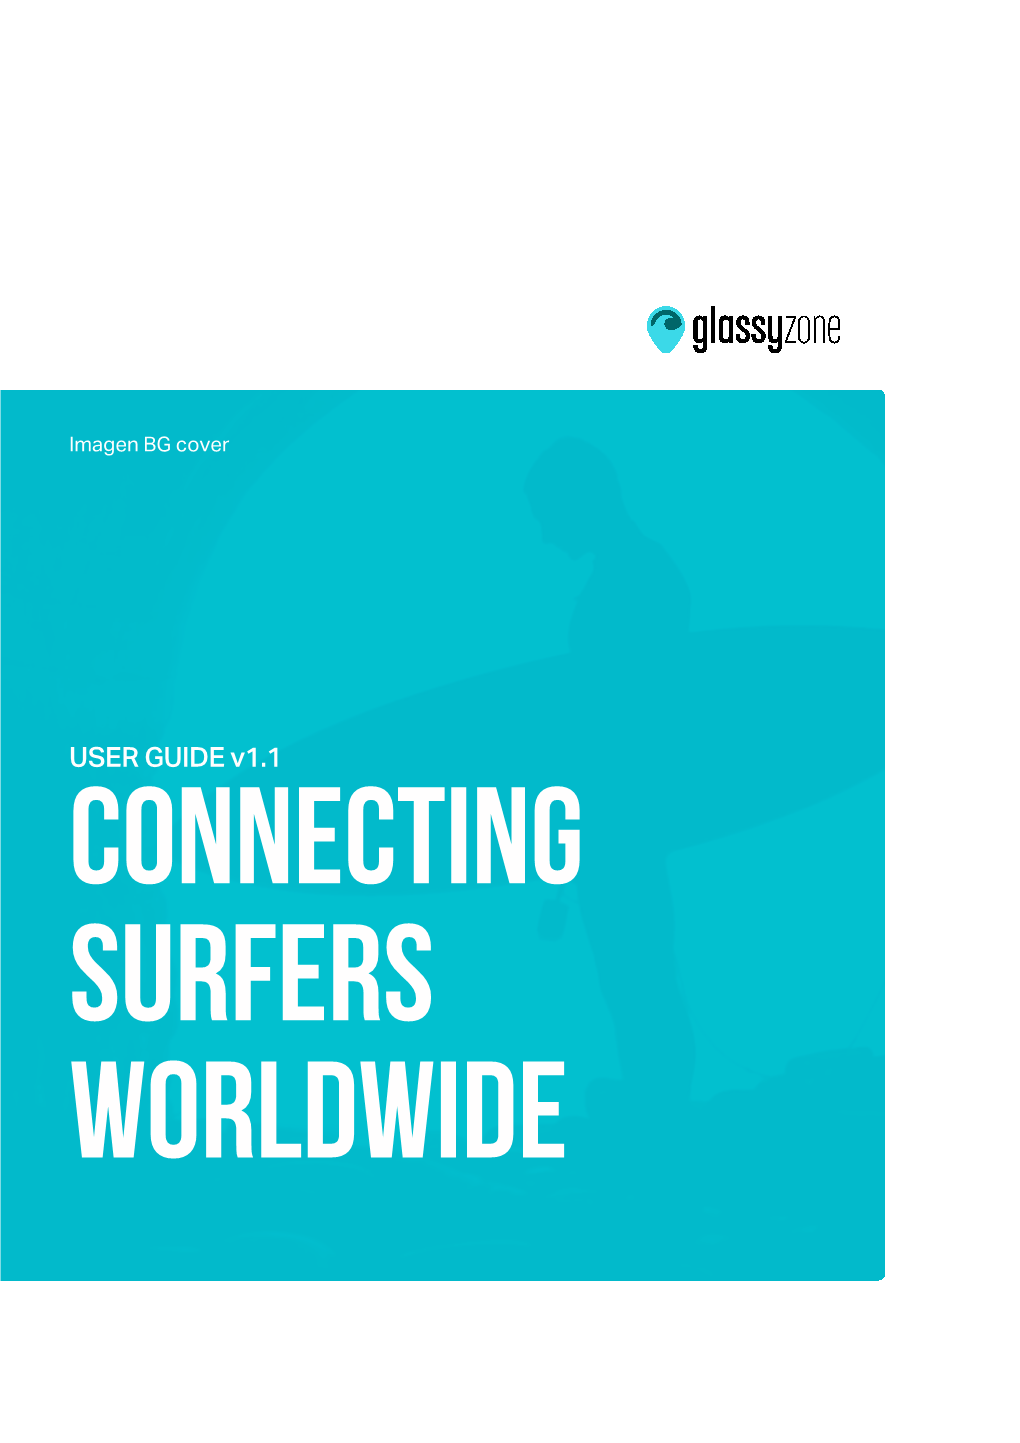 USER GUIDE V1.1 Connecting Surfers Worldwide Contents